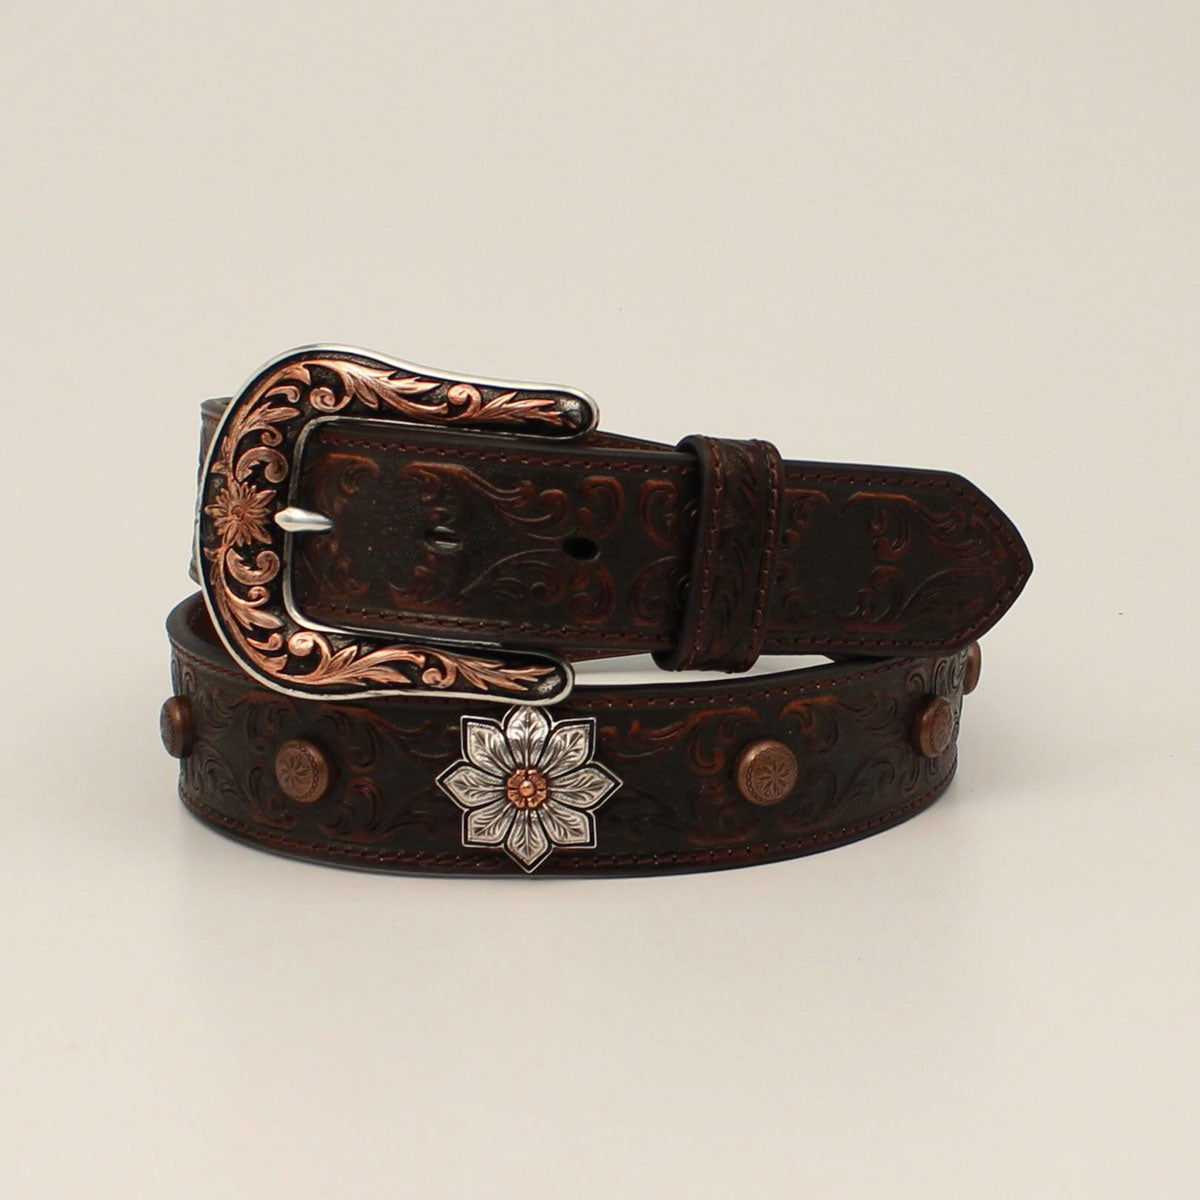 Ariat Women's Leather Floral Embossed Flower Concho Belt - Brown